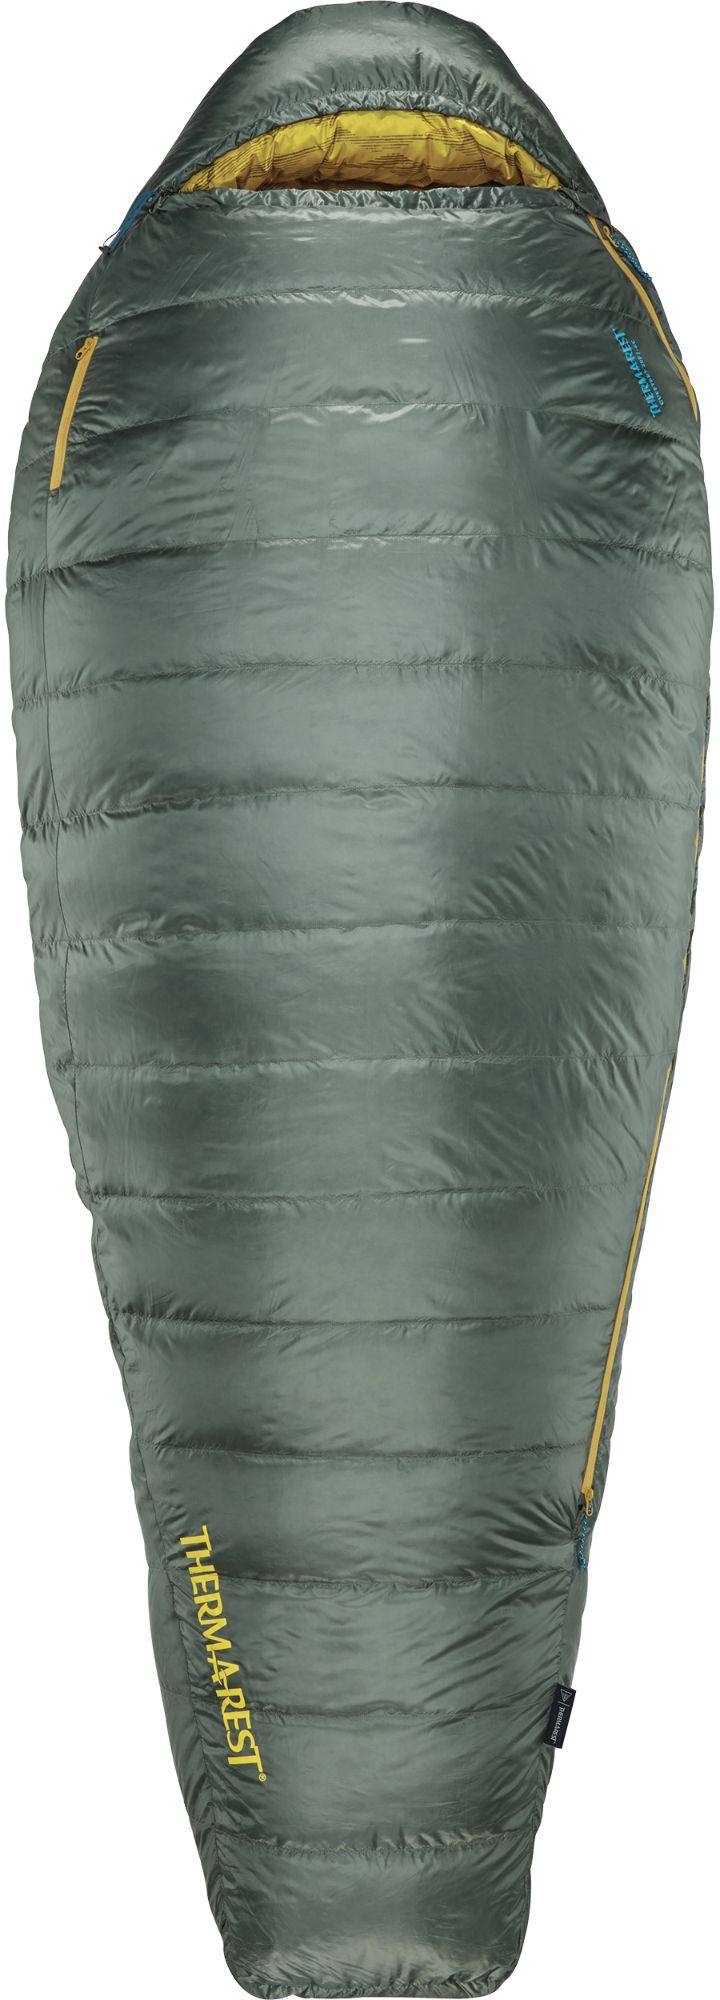 Thermarest Questar 20F/-6C Long